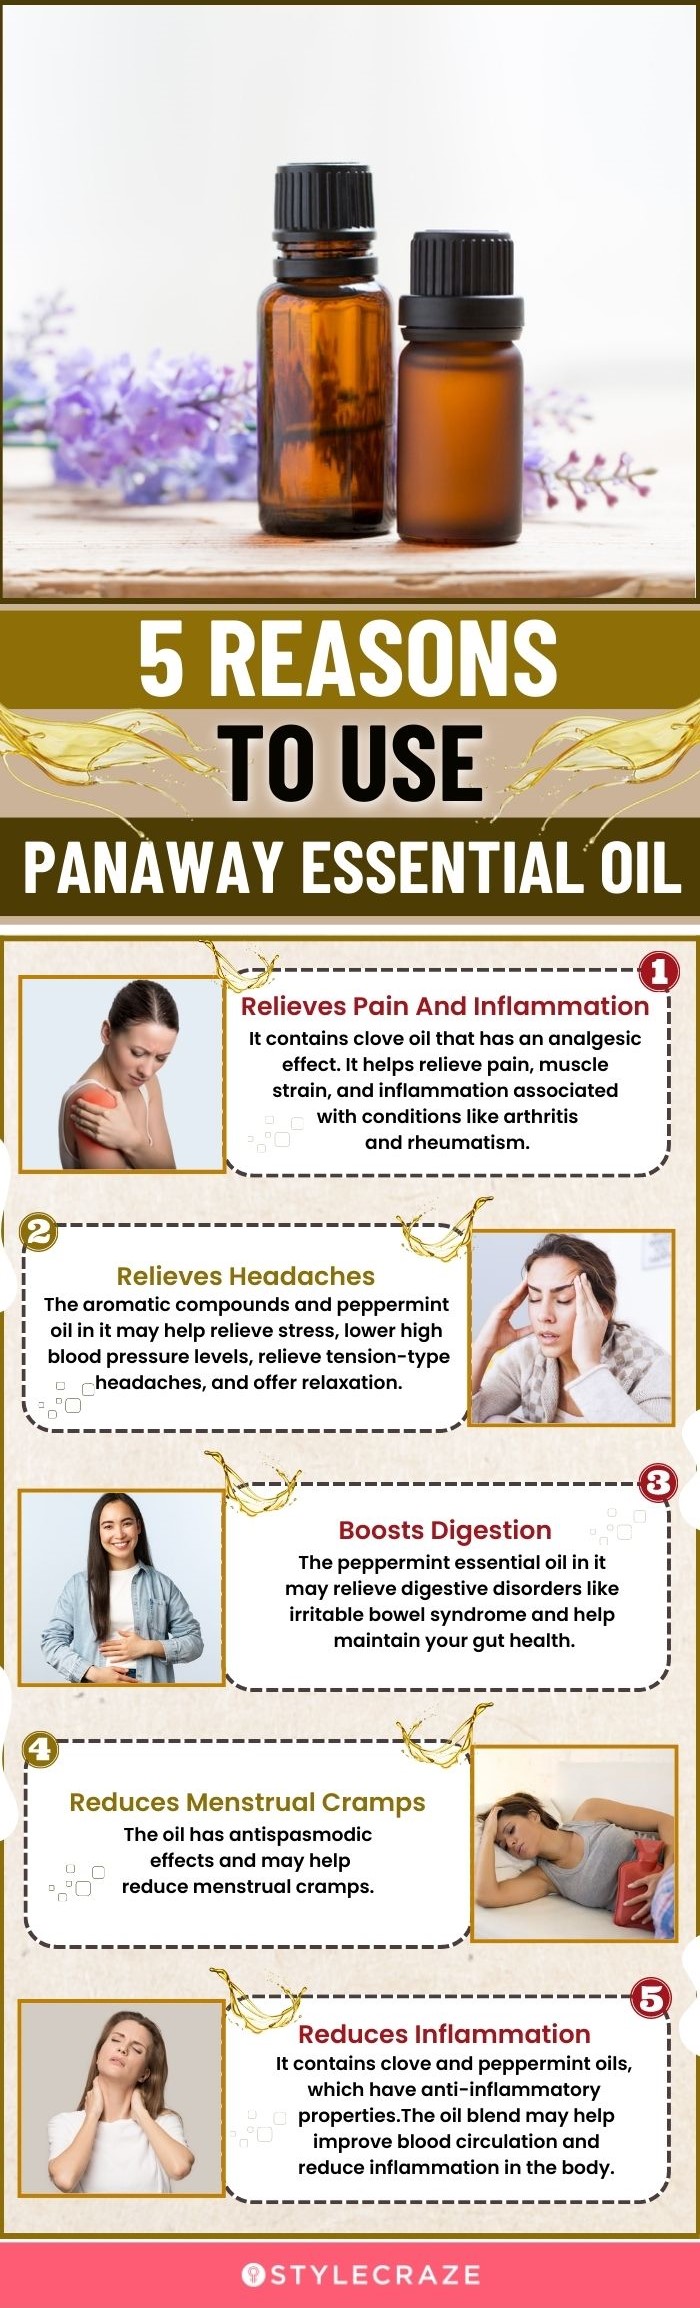 5 reasons to use panaway essential oil (infographic)